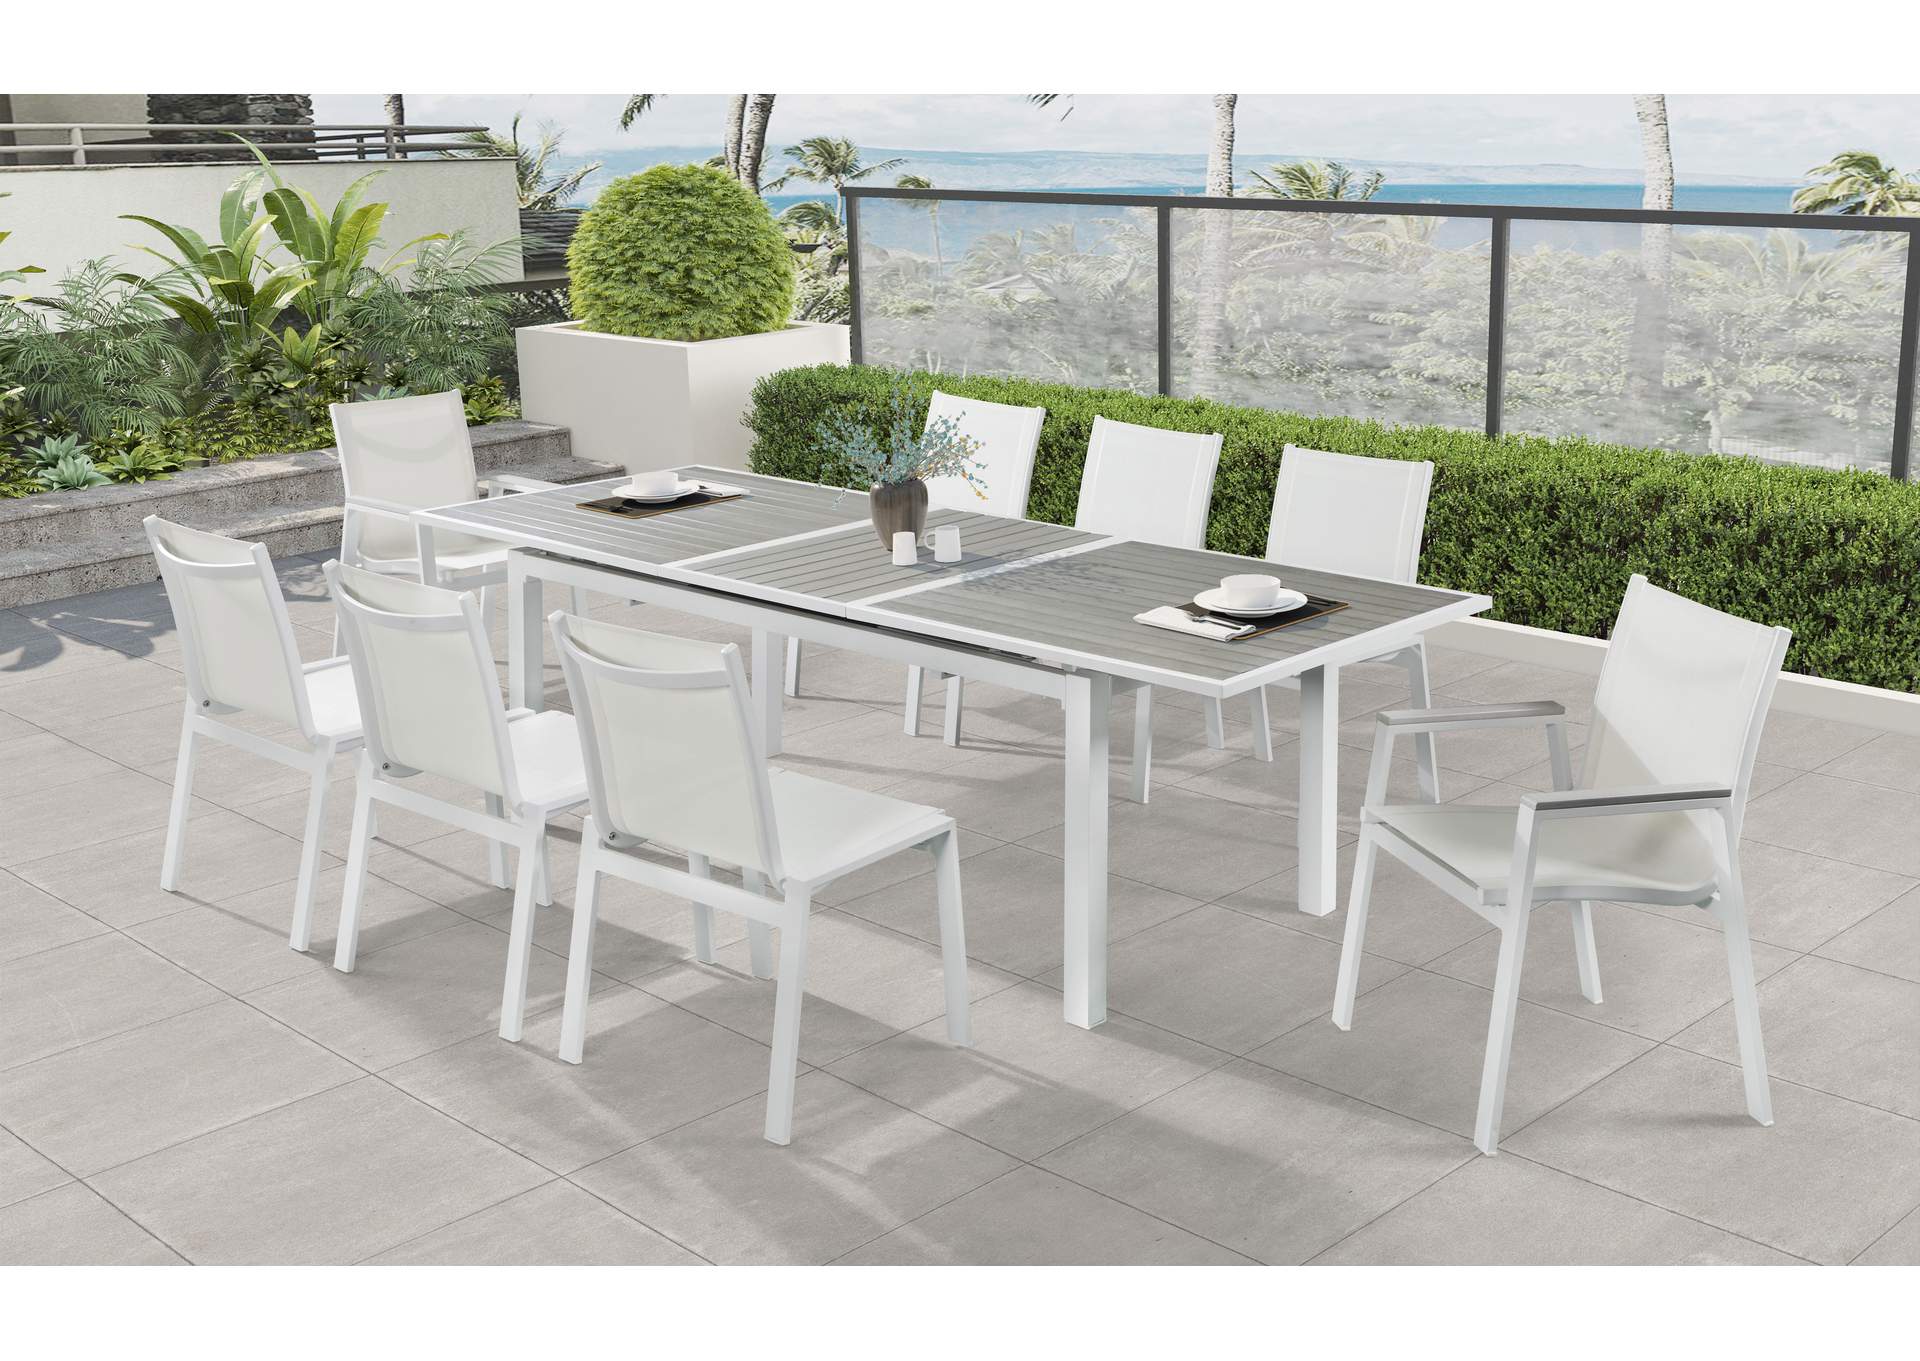 Nizuc Grey Wood Look Accent Paneling Outdoor Patio Extendable Aluminum Dining Table,Meridian Furniture